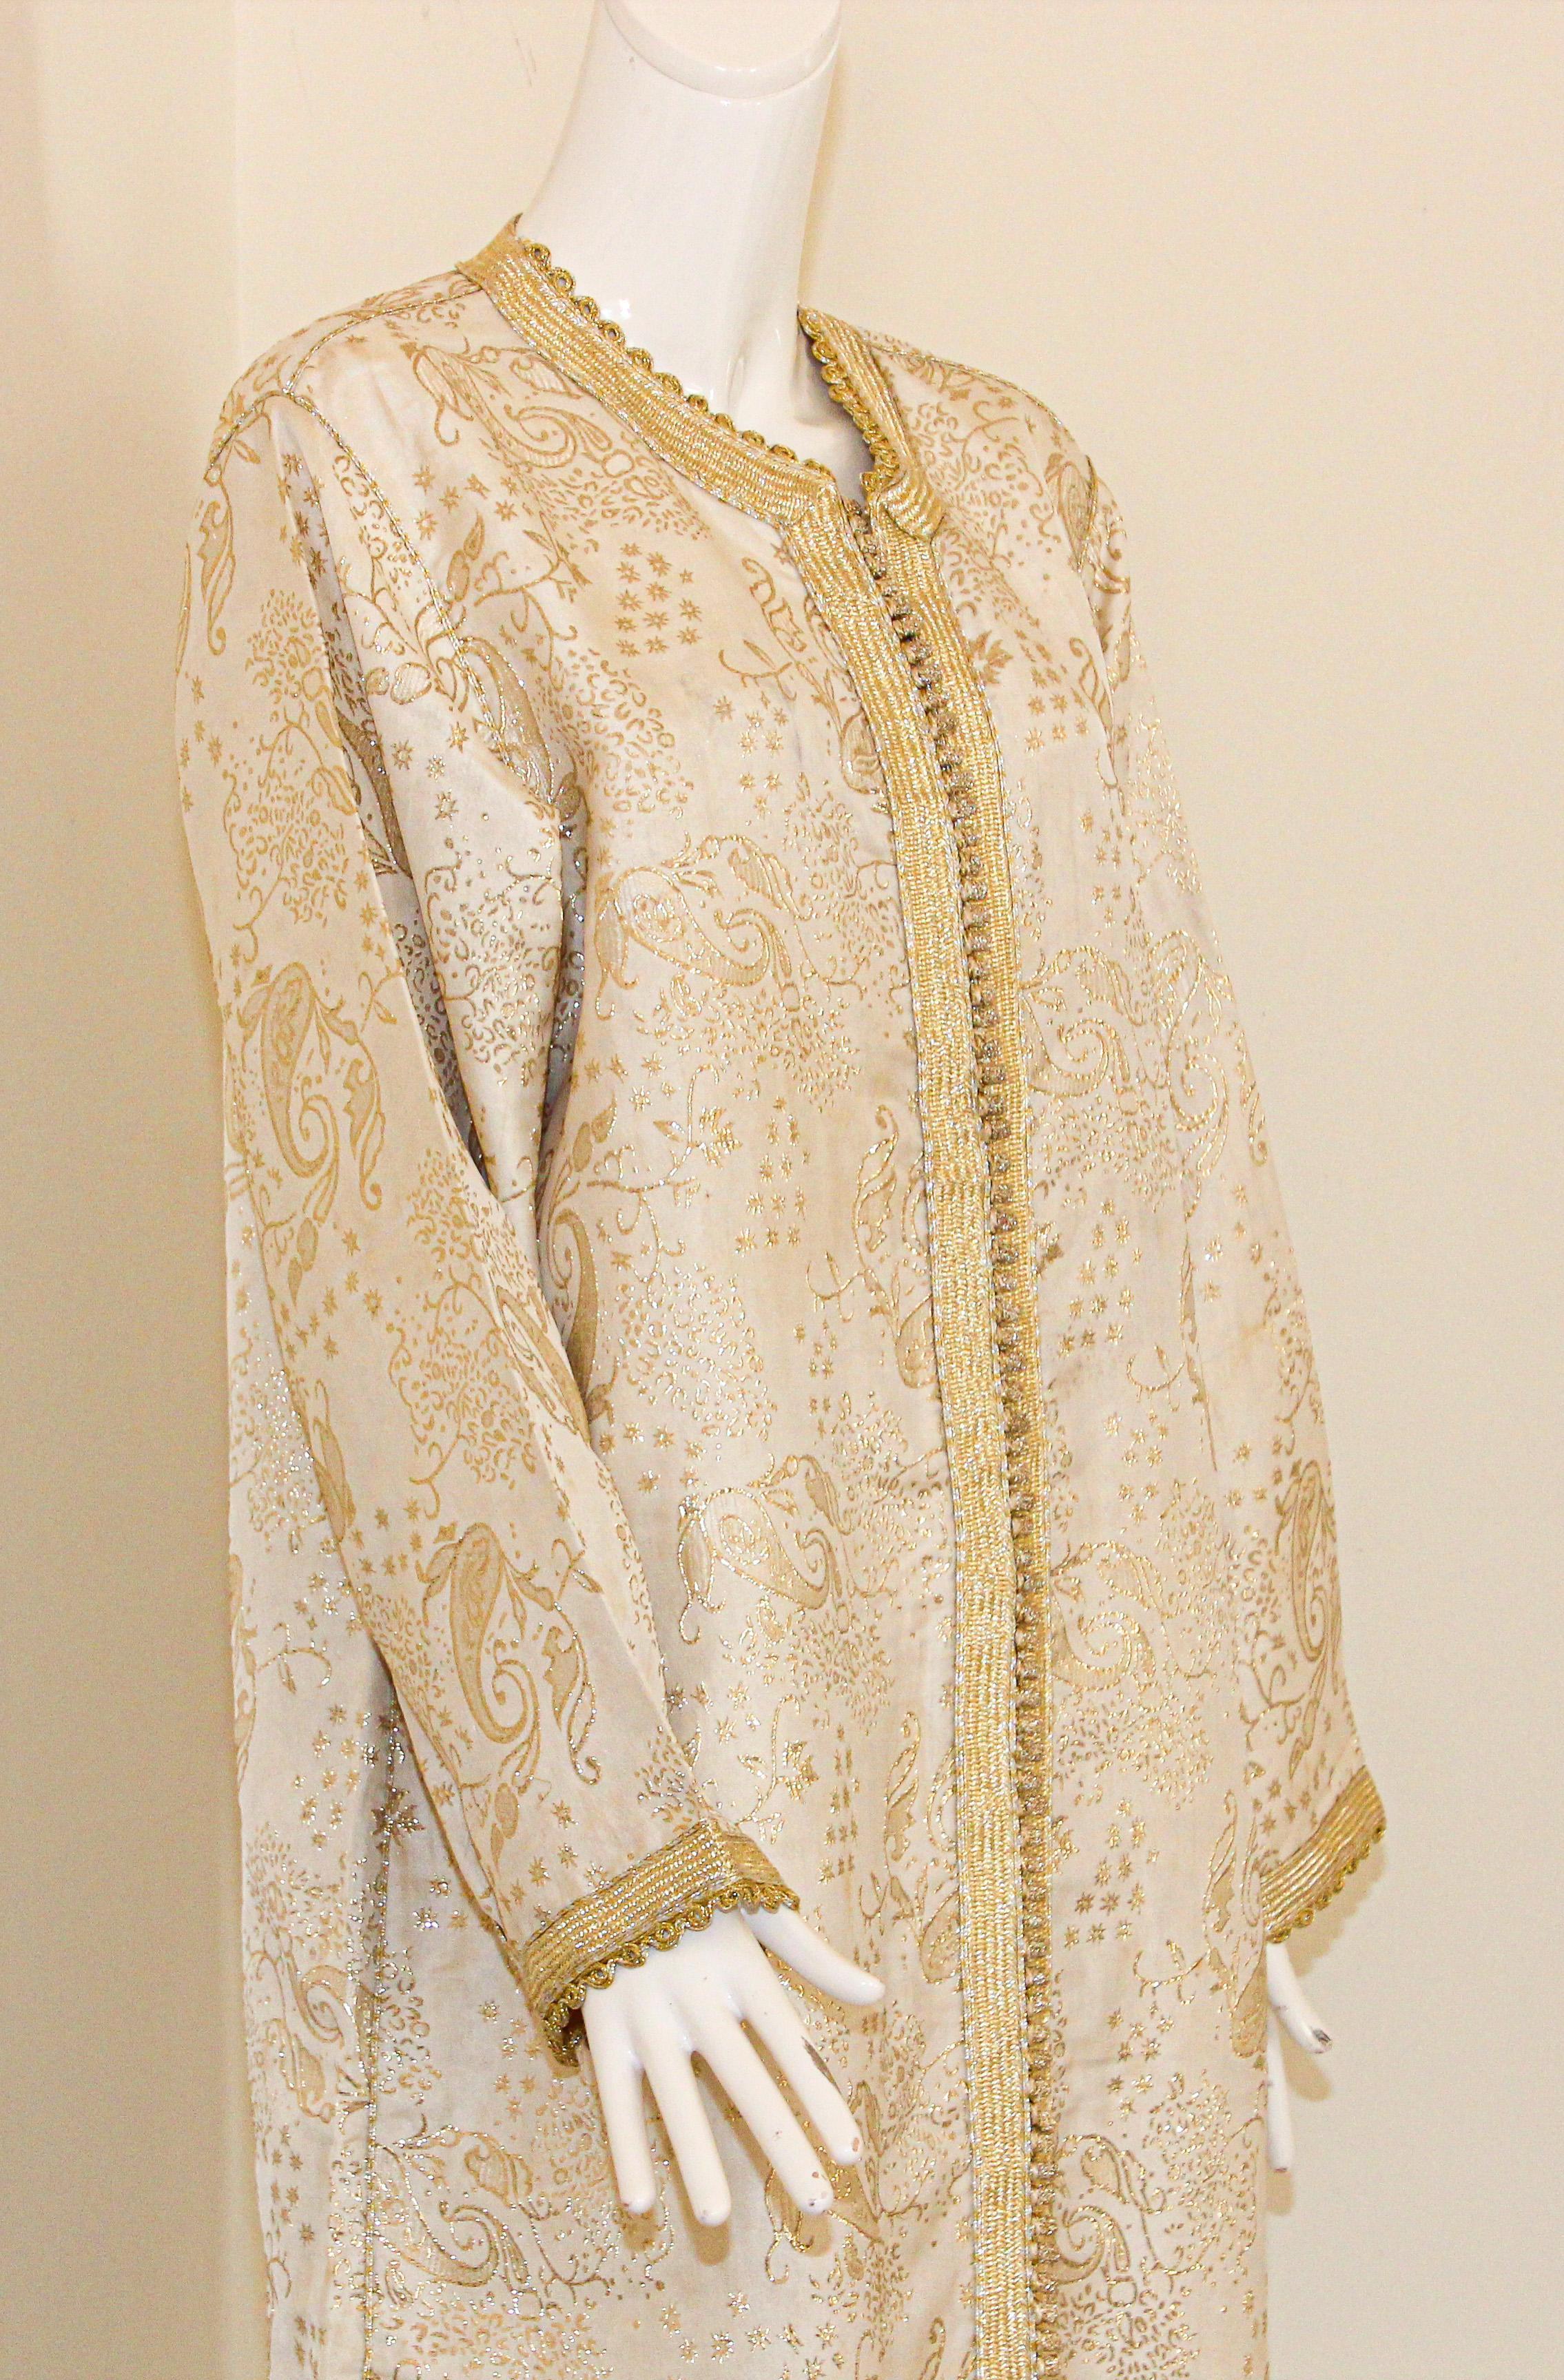 Elegant Moroccan White Caftan with Gold Metallic Floral Brocade In Good Condition For Sale In North Hollywood, CA